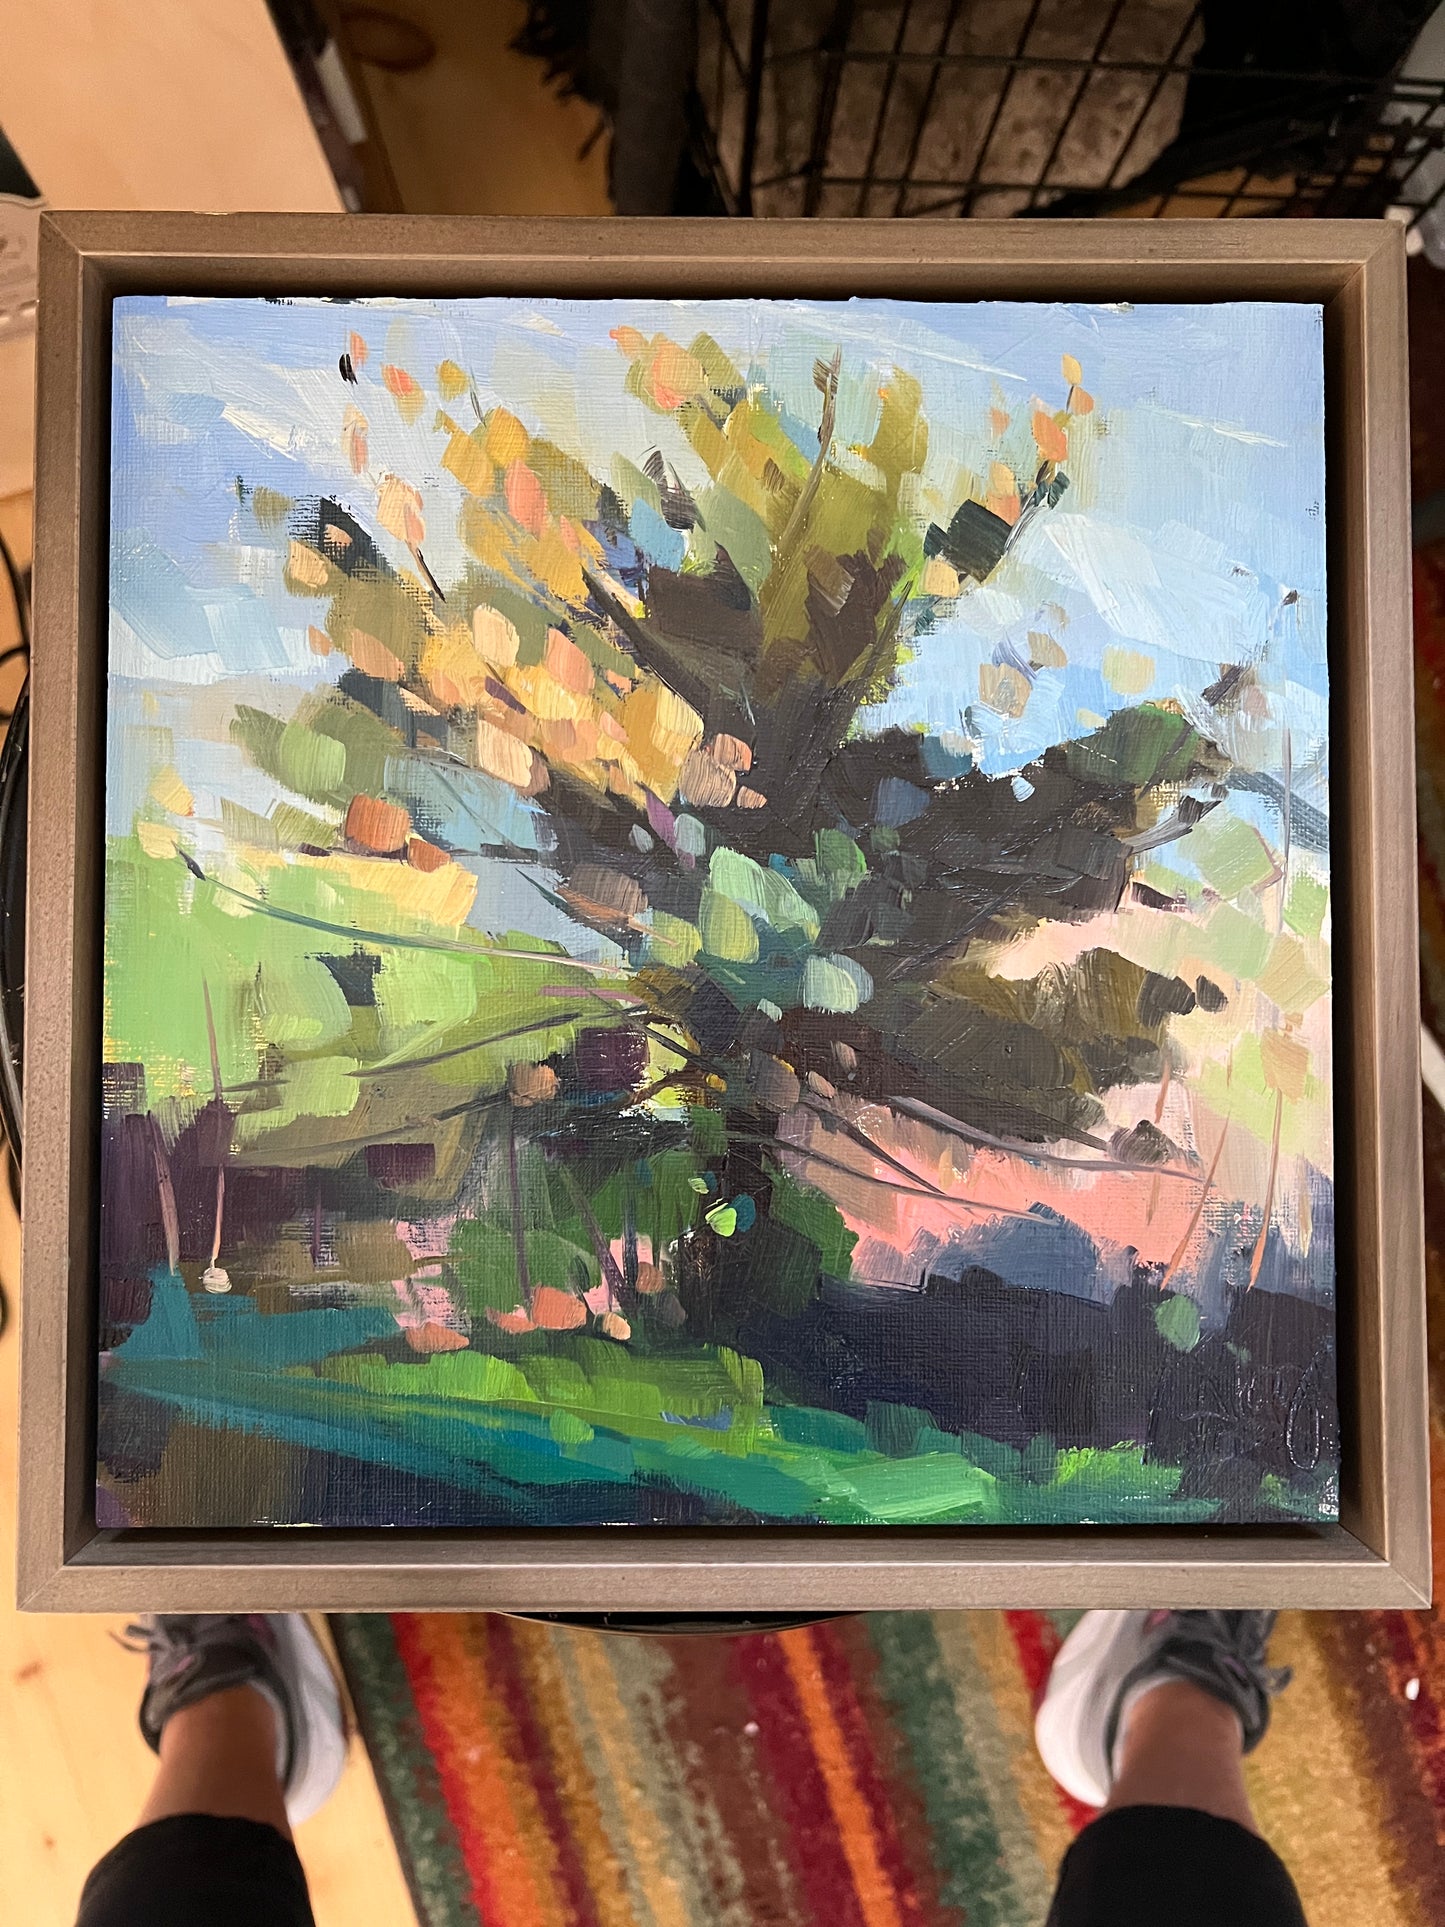 Pine Tree in the Morning, 10" x 10" Original Oil Painting, Framed